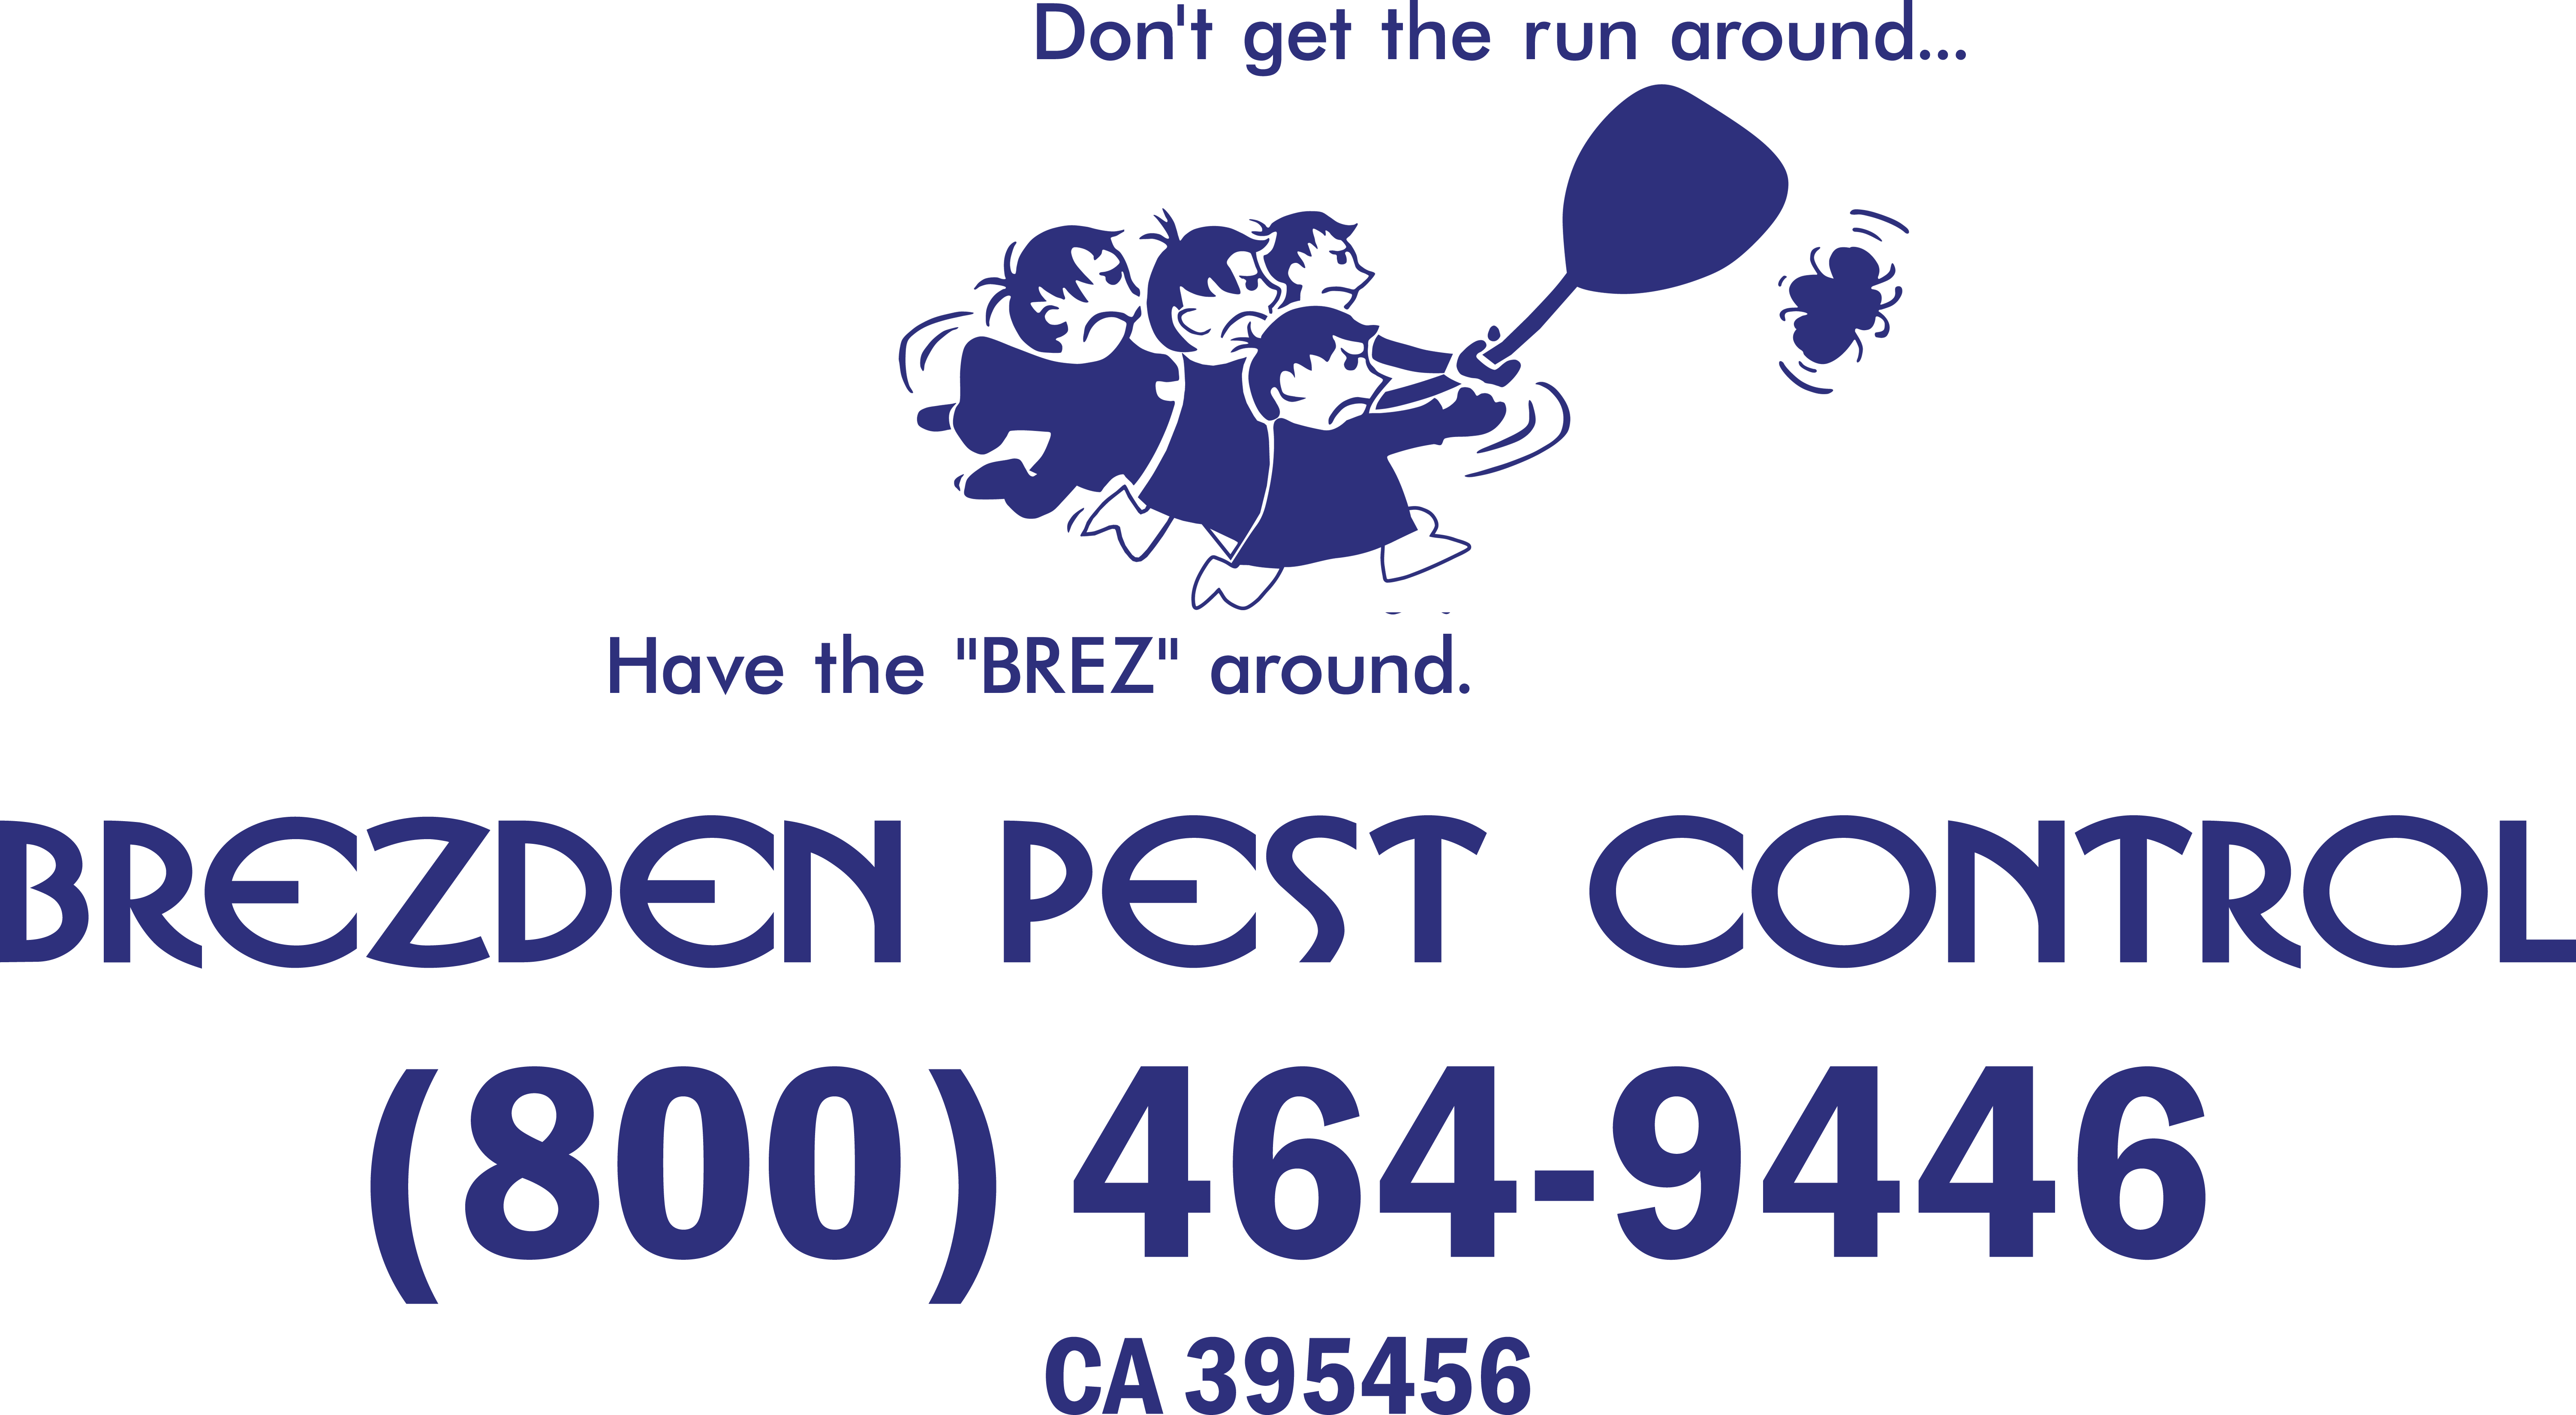 Brezdenpest Logo With Title Blue And Red